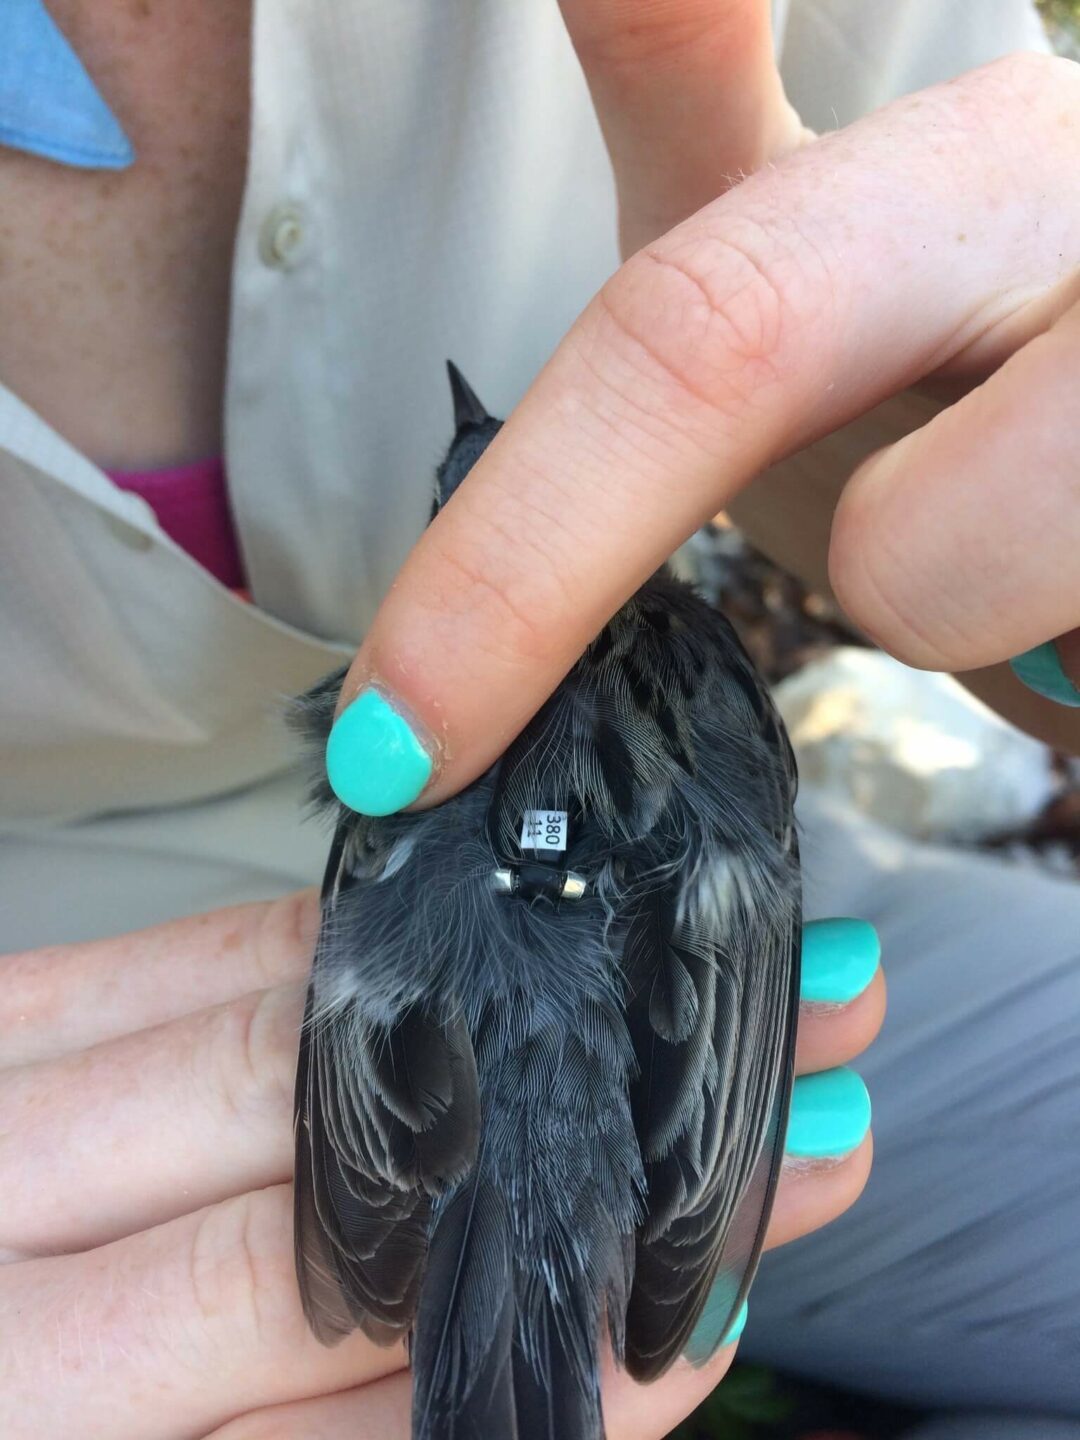 a bird on its back in a persons hand. It has a small blue square on its belly.